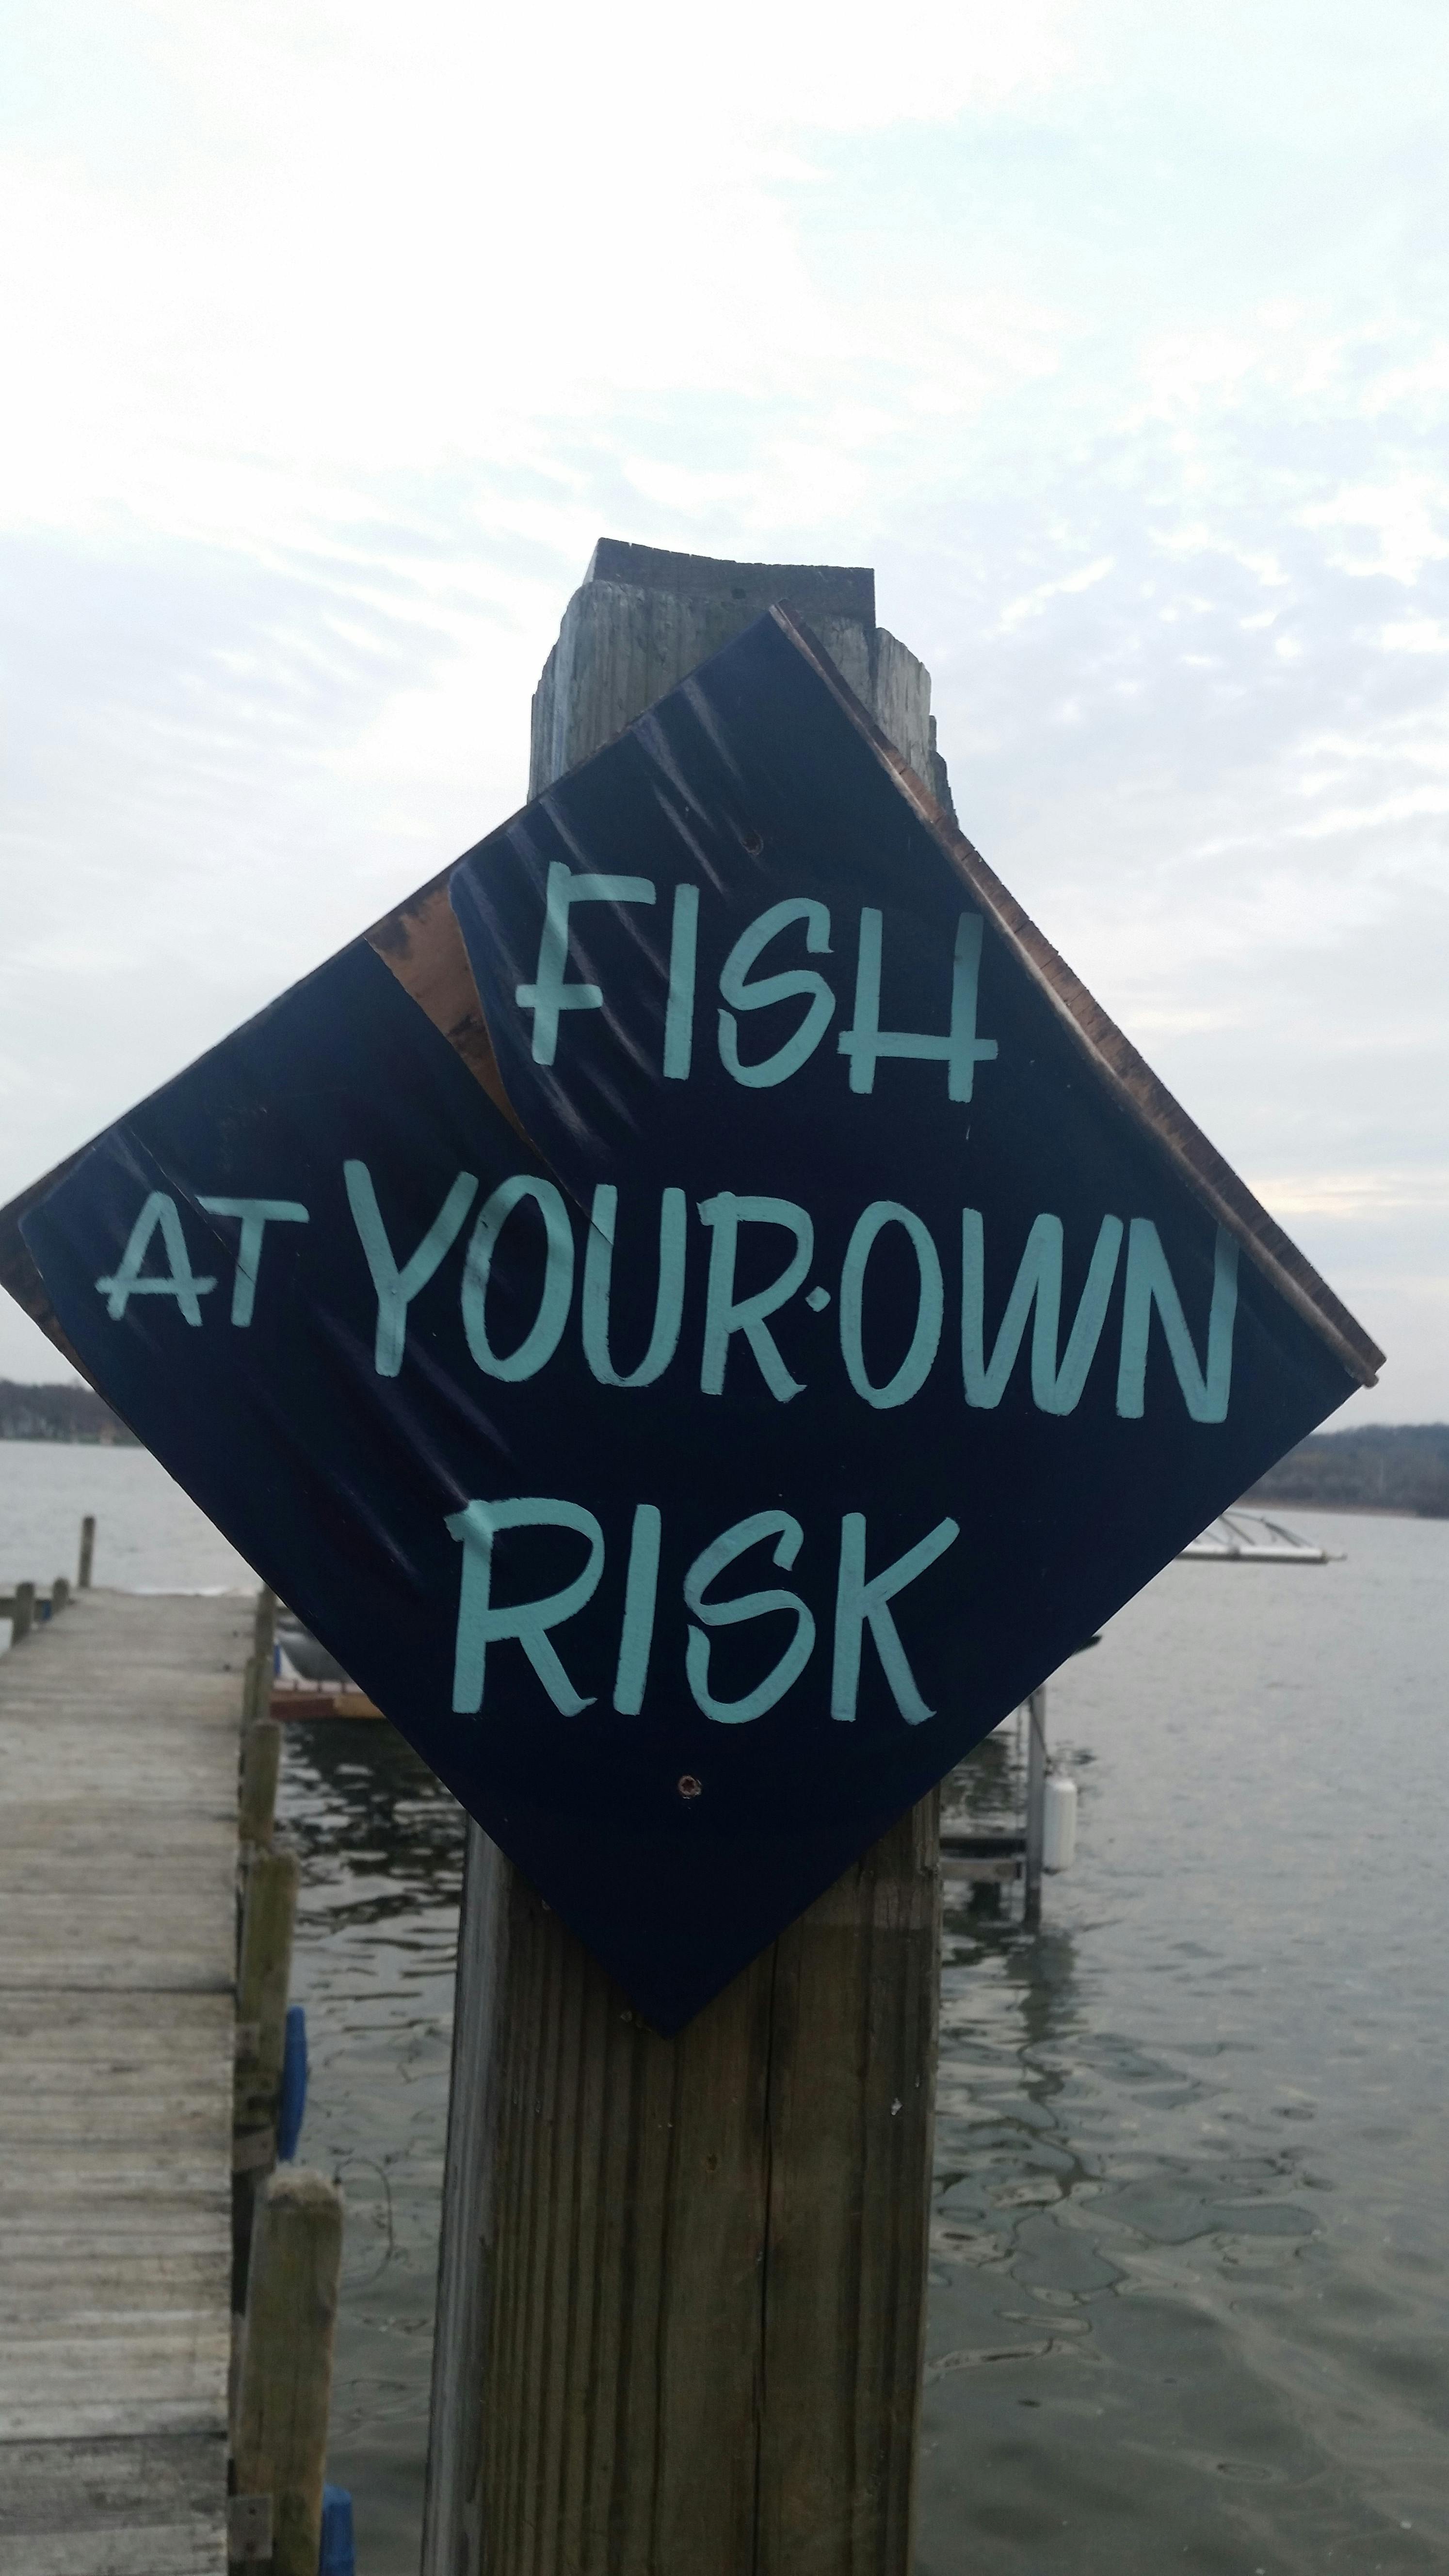 Free stock photo of fish at your own risk, sign